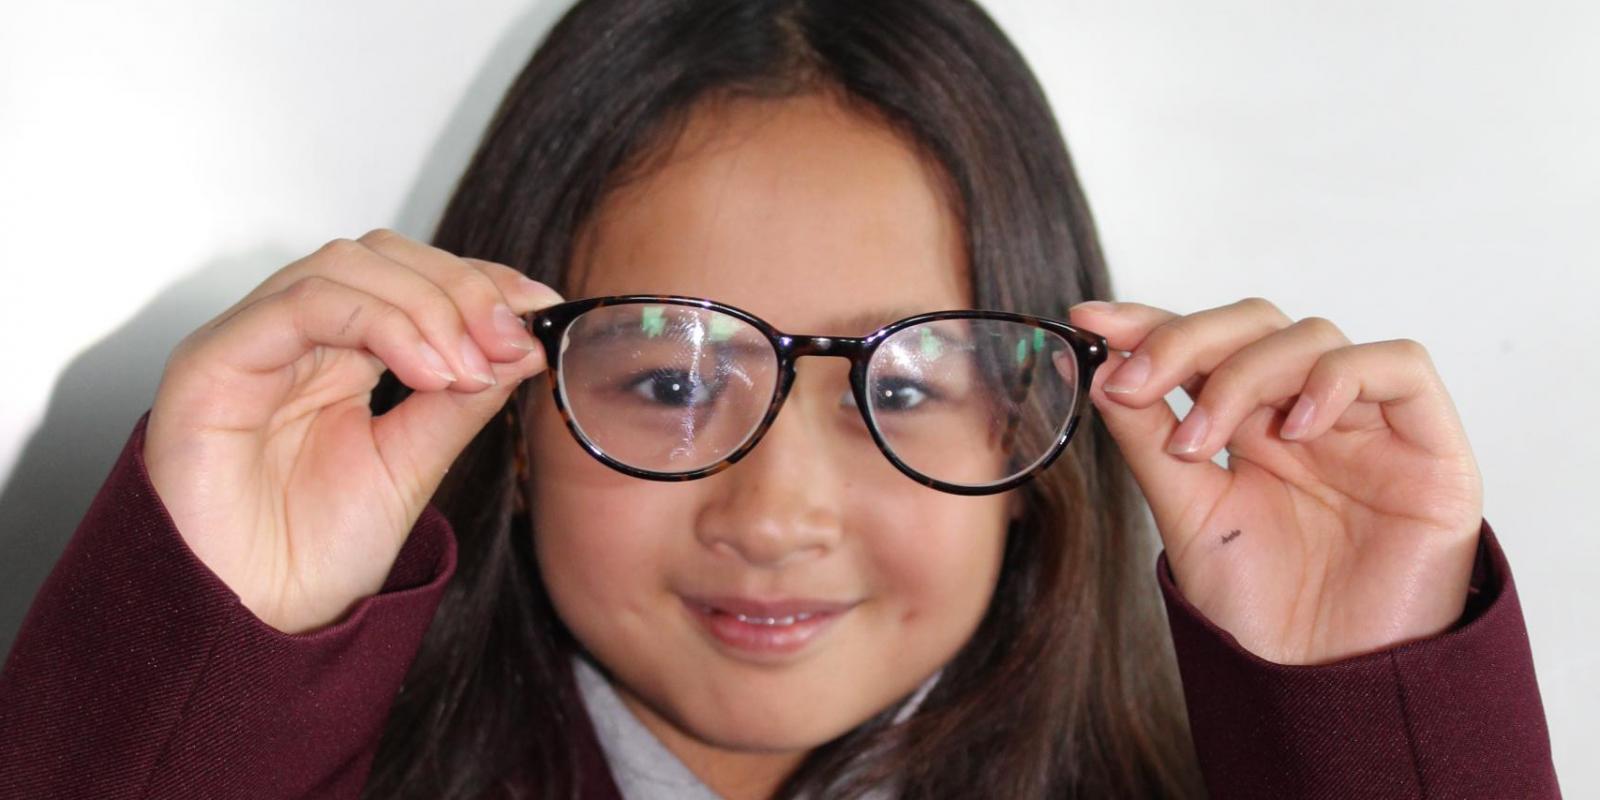 Schoolgirl holding glasses up to face